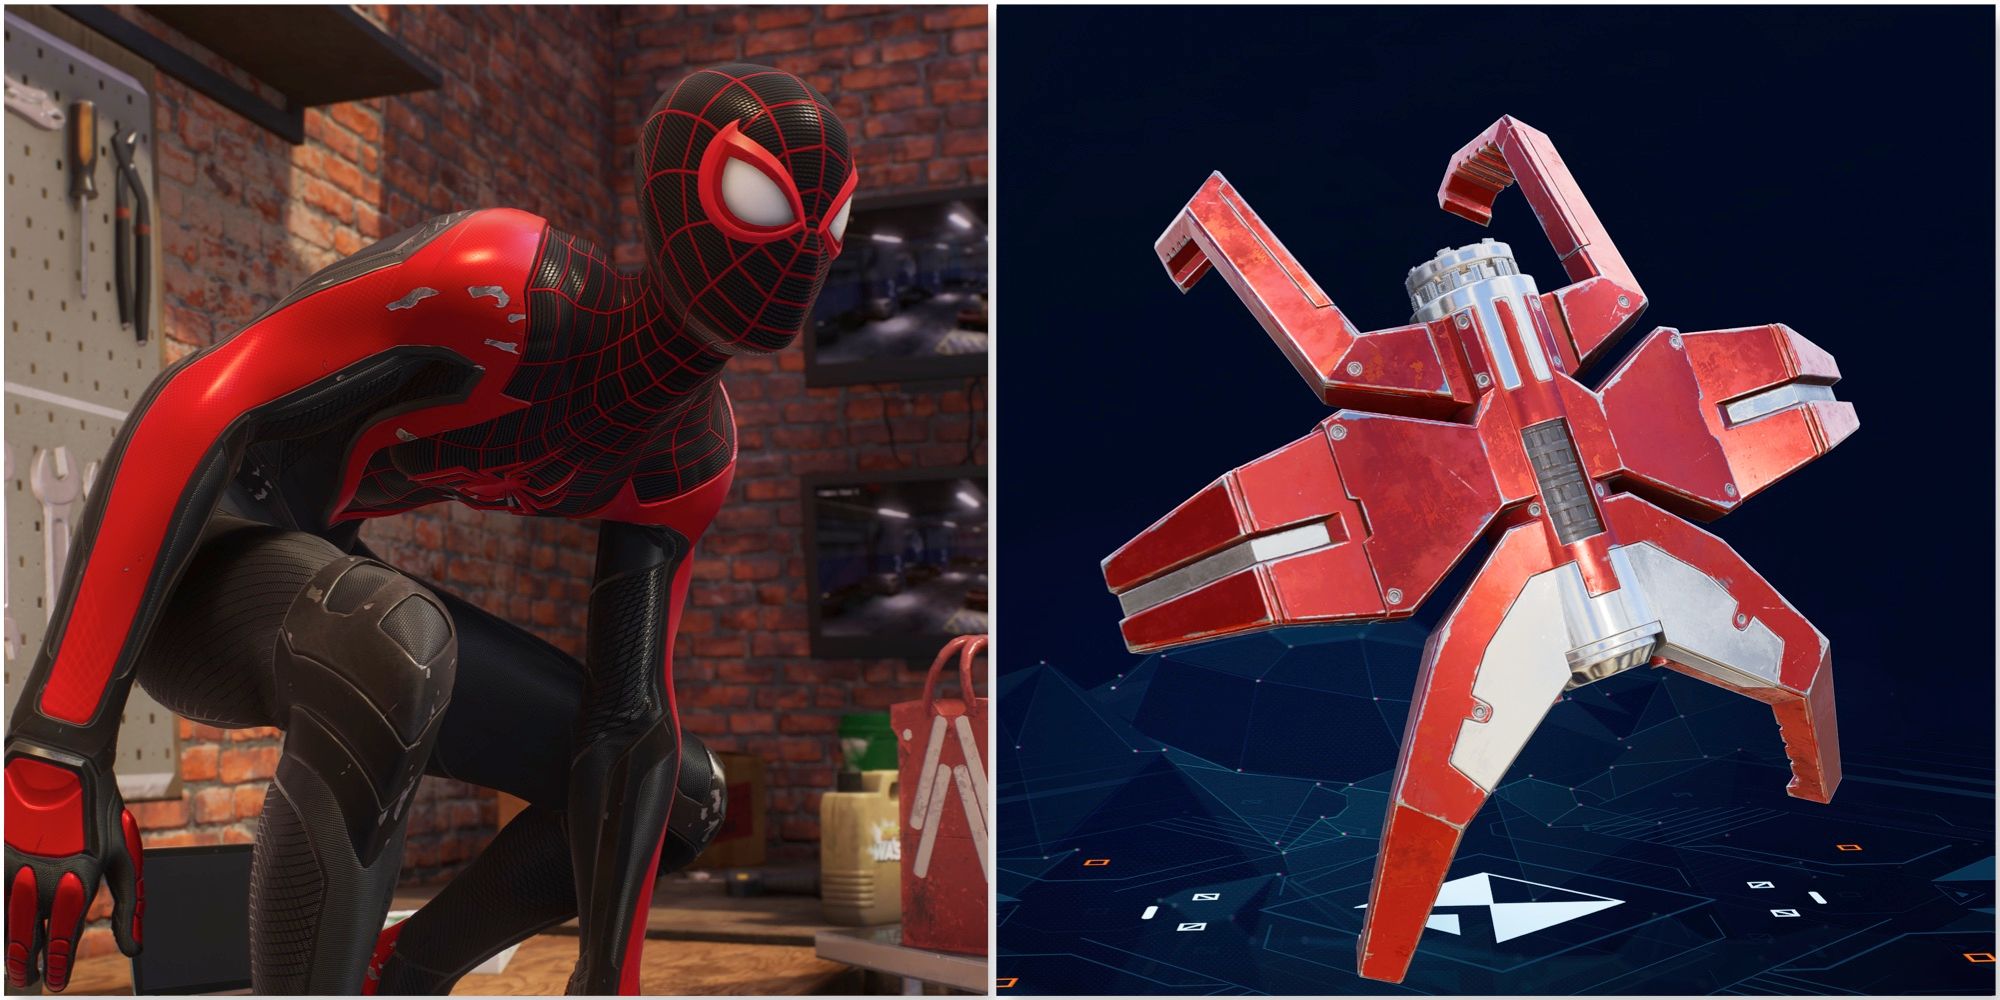 Marvel's Spider-Man 2: Every Gadget, Ranked